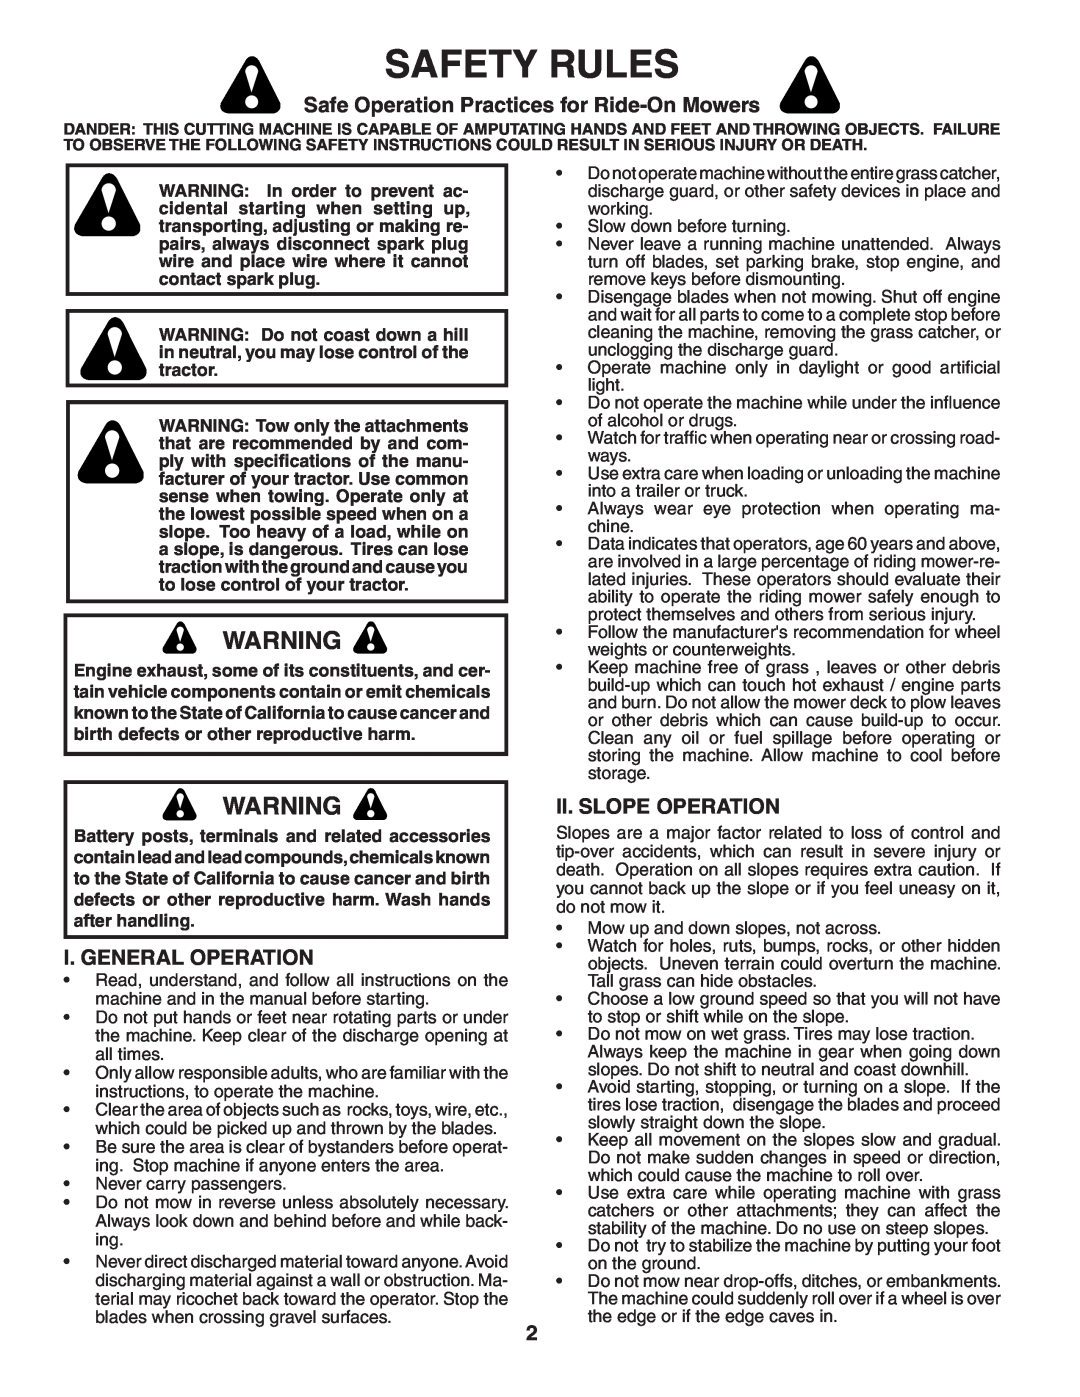 Poulan PB22H48YT Safety Rules, Safe Operation Practices for Ride-On Mowers, I. General Operation, Ii. Slope Operation 